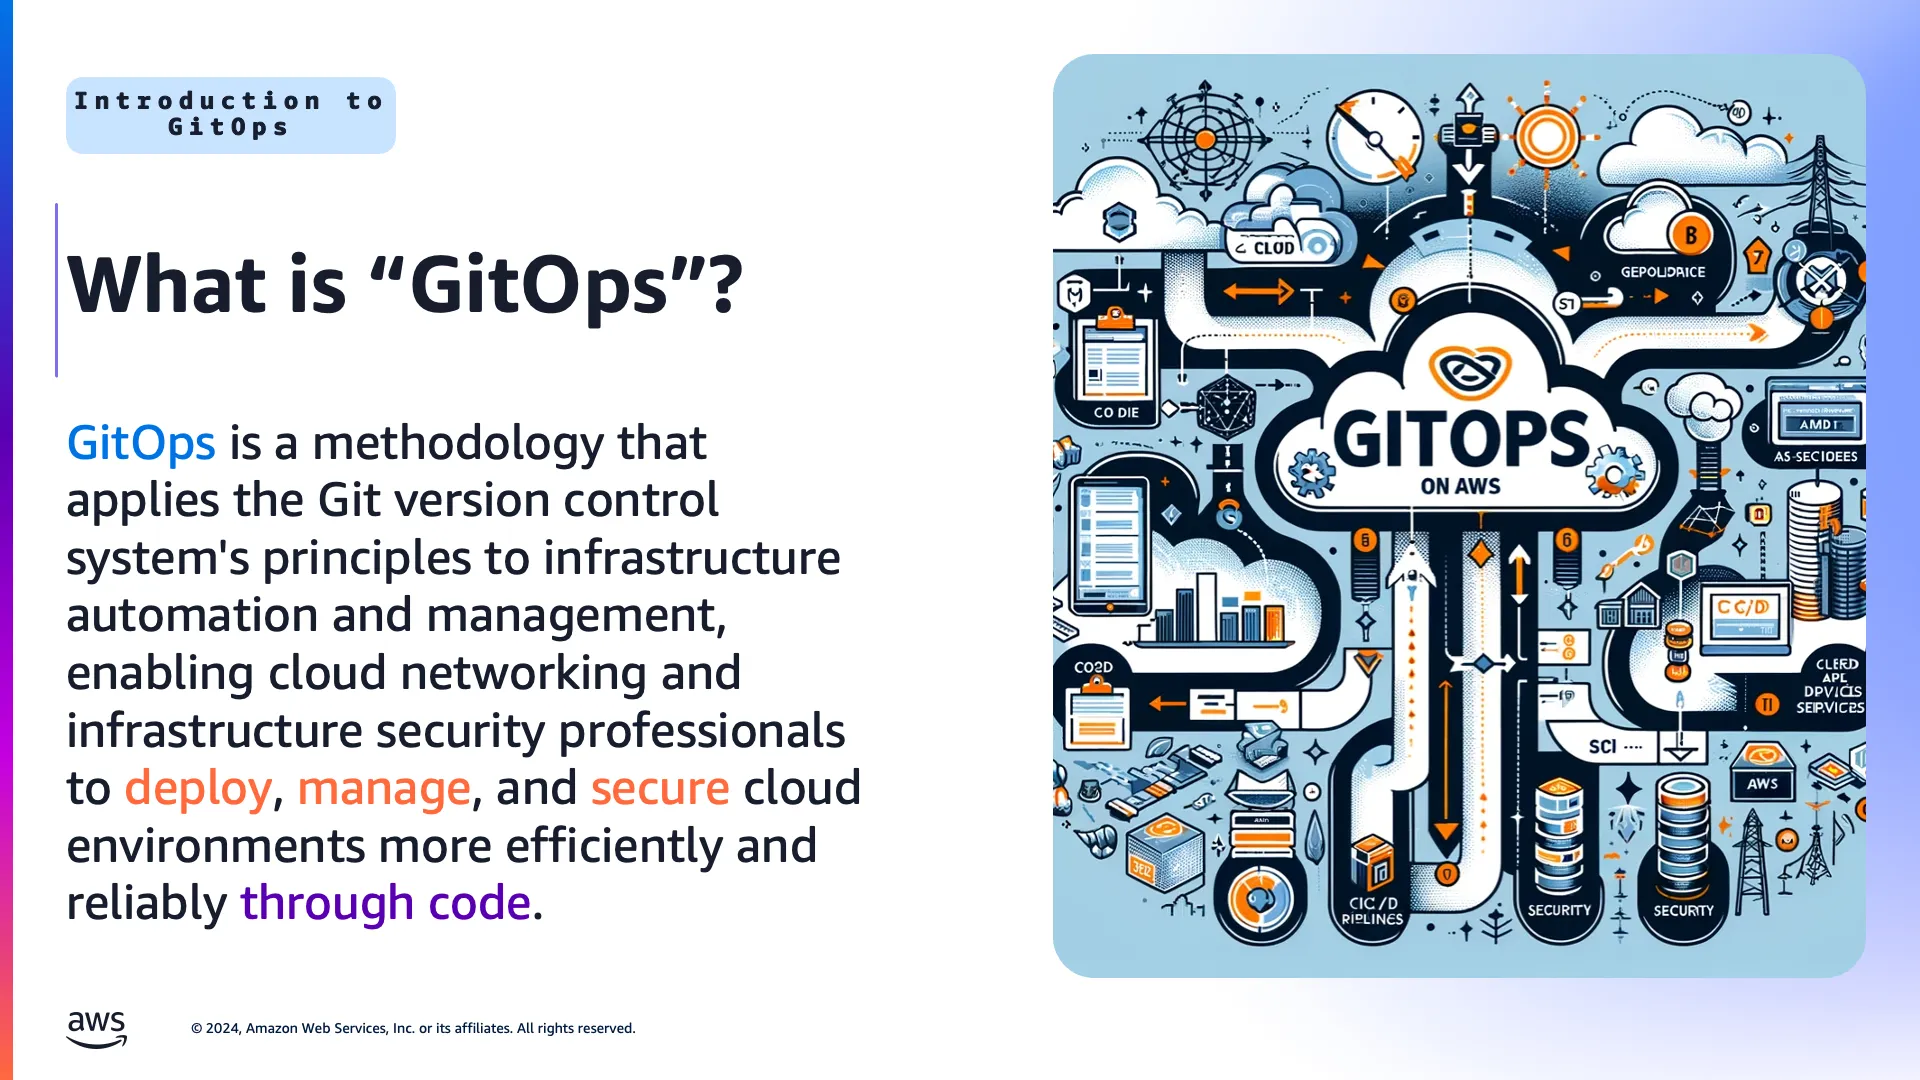 GitOps is a methodology that applies the Git version control system's principles to infrastructure a